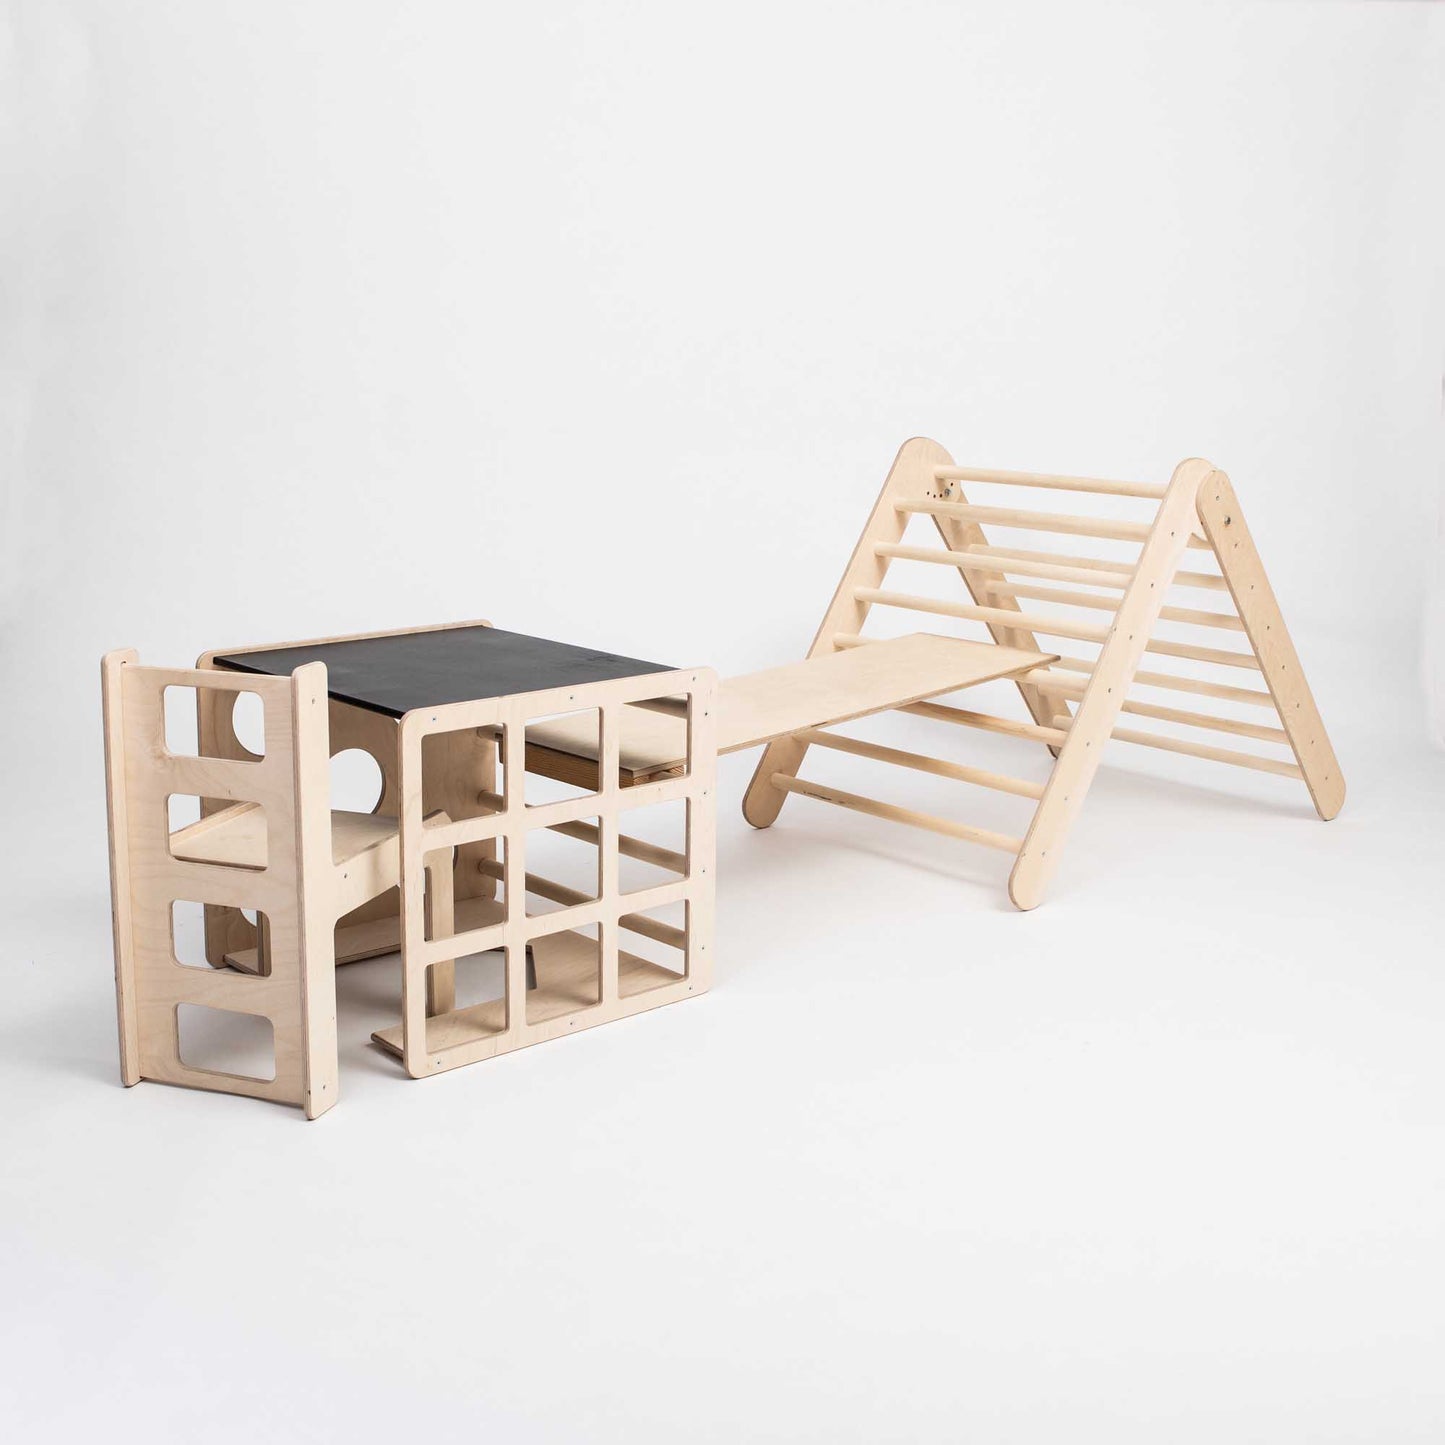 Foldable climbing triangle + Transformable climbing cube / table and chair  + a ramp